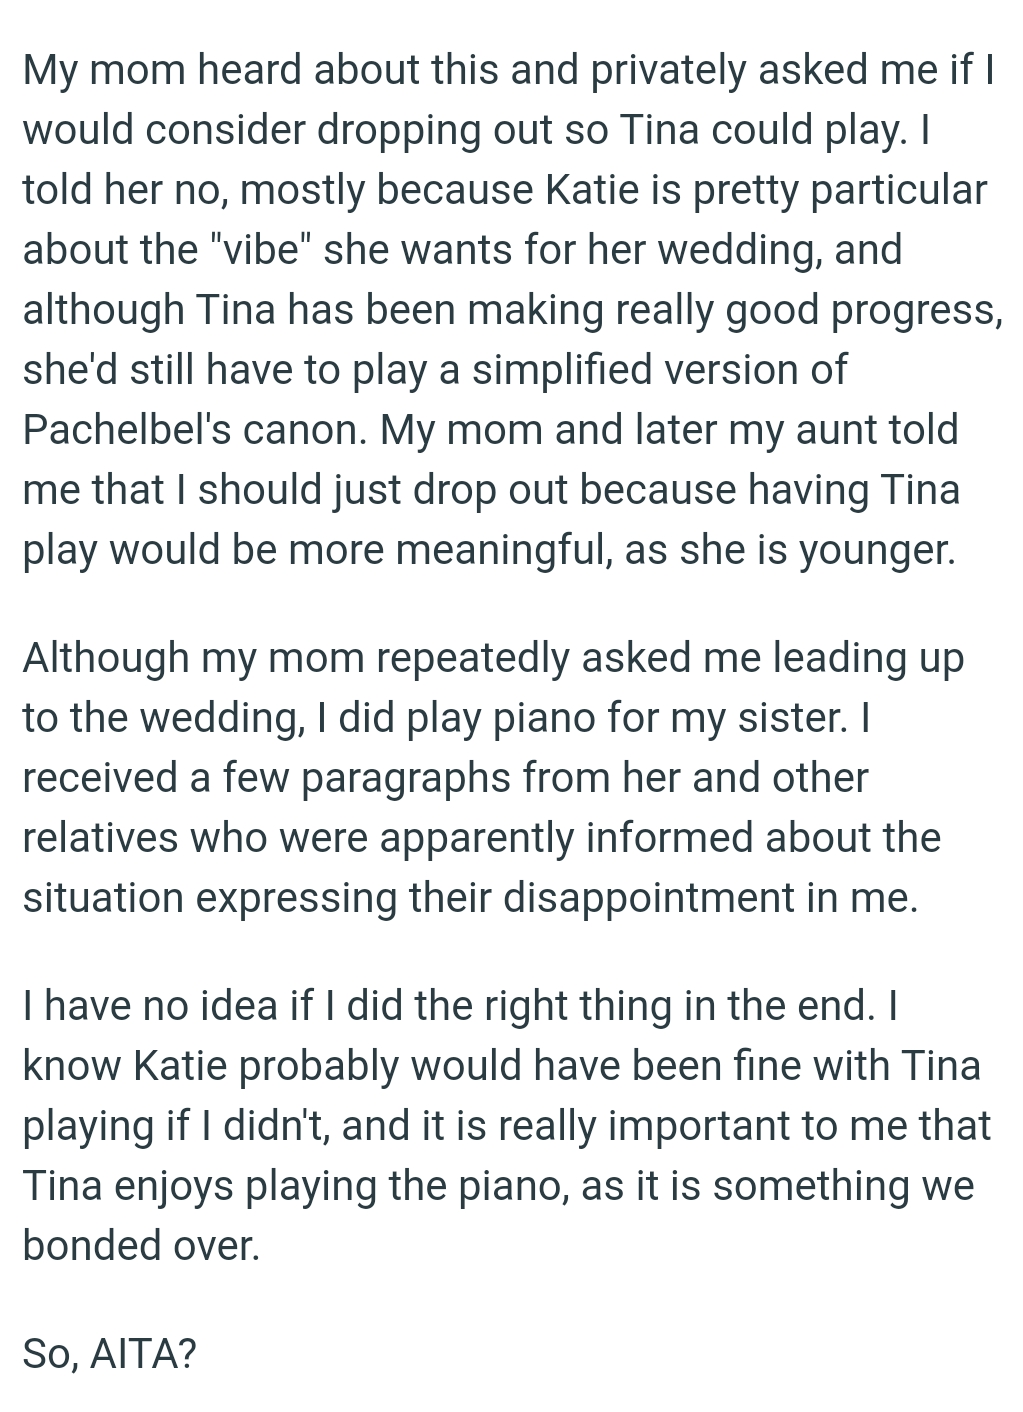 The OP received a few paragraphs from her and other relatives